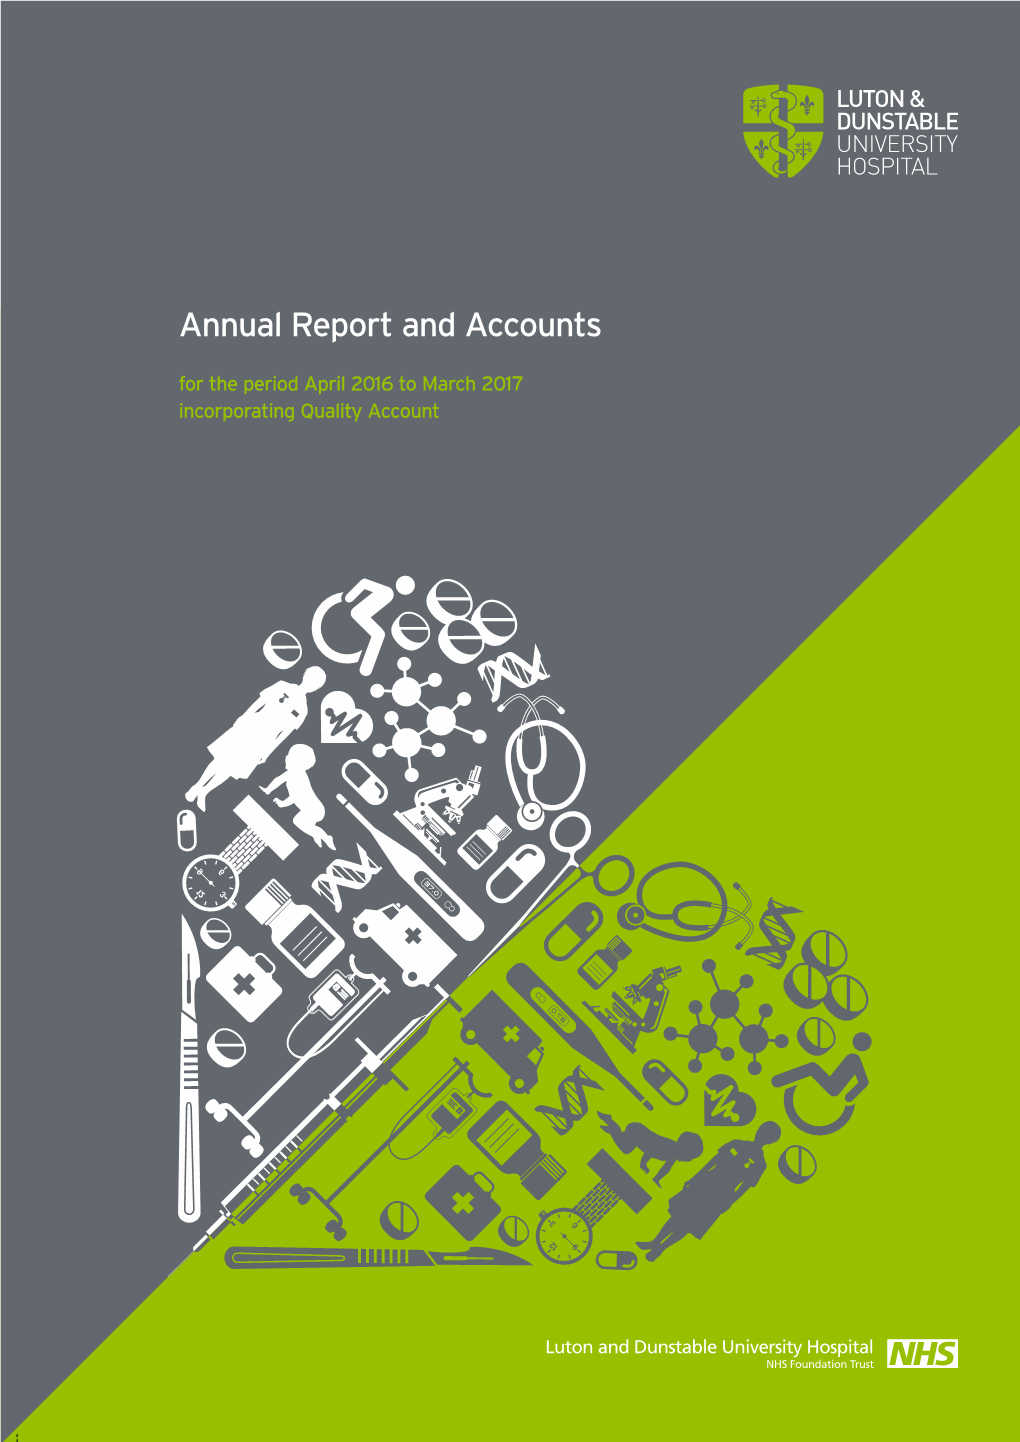 Luton & Dunstable University Hospital Annual Report and Accounts 2016